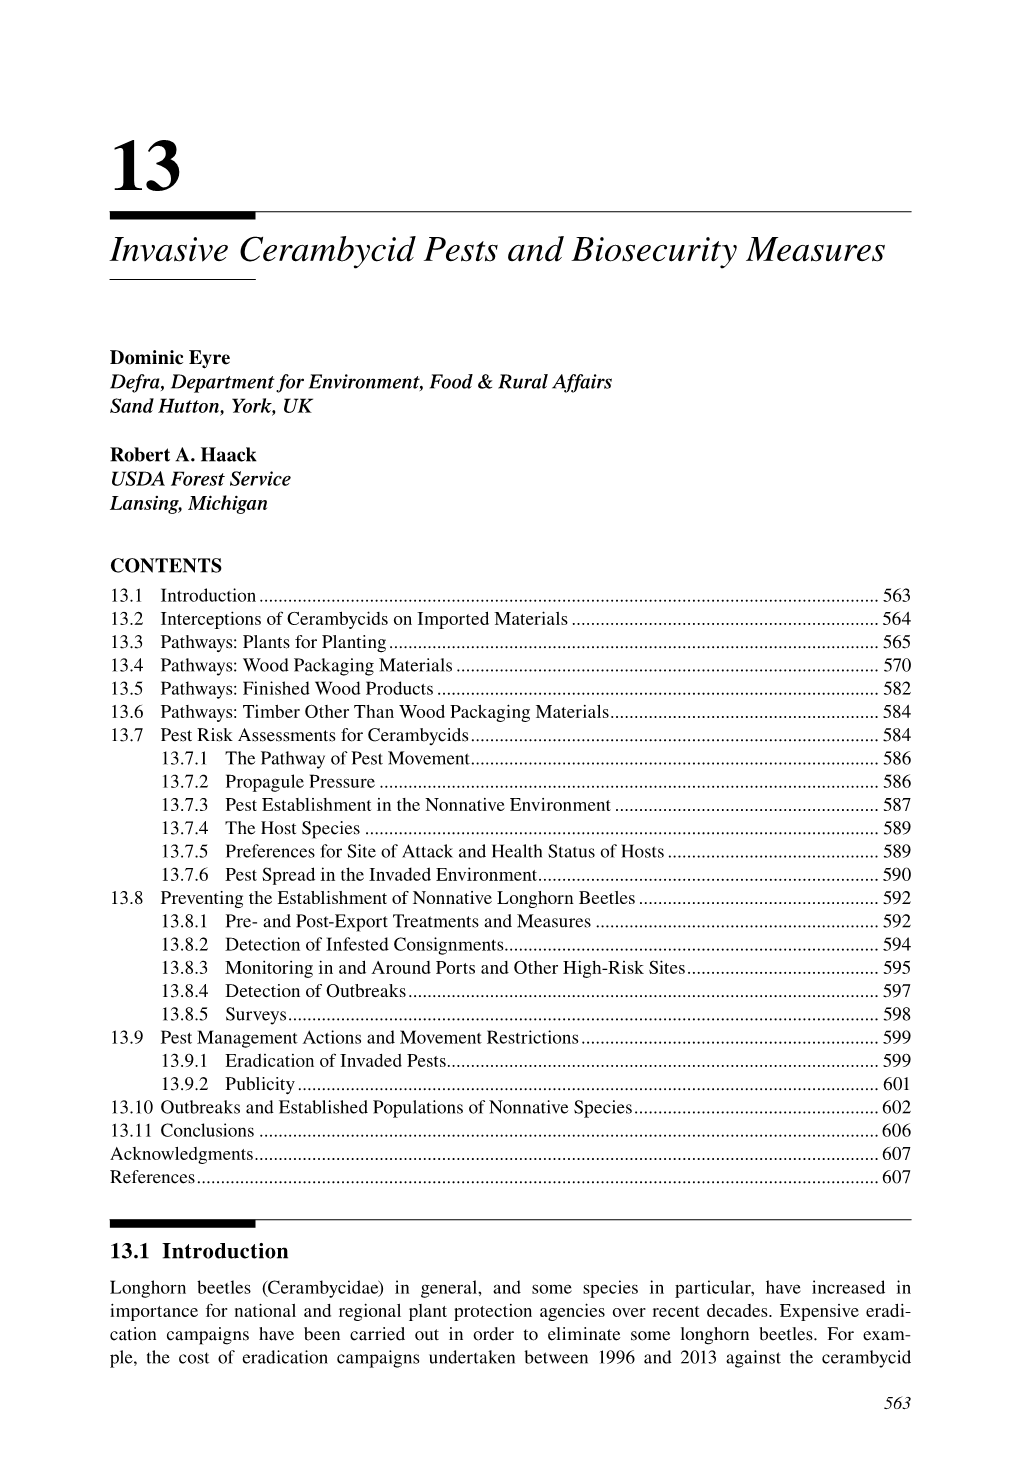 Invasive Cerambycid Pests and Biosecurity Measures. Chapter